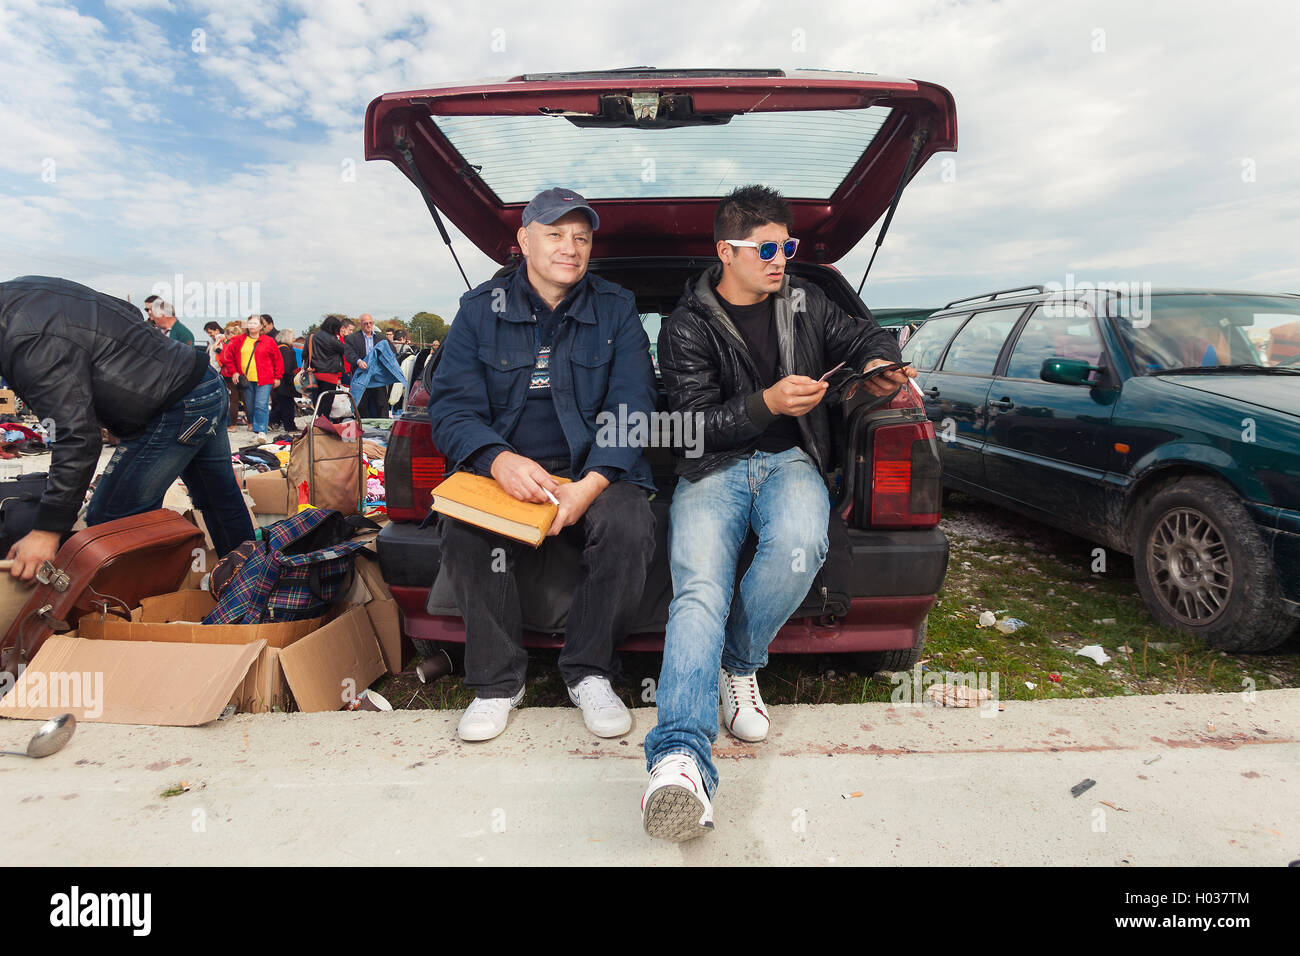 ZAGREB, CROATIA - OCTOBER 20, 2013: Young Roma man sitting at the car trunk with salesman at Zagreb's flea market Hrelic. Stock Photo